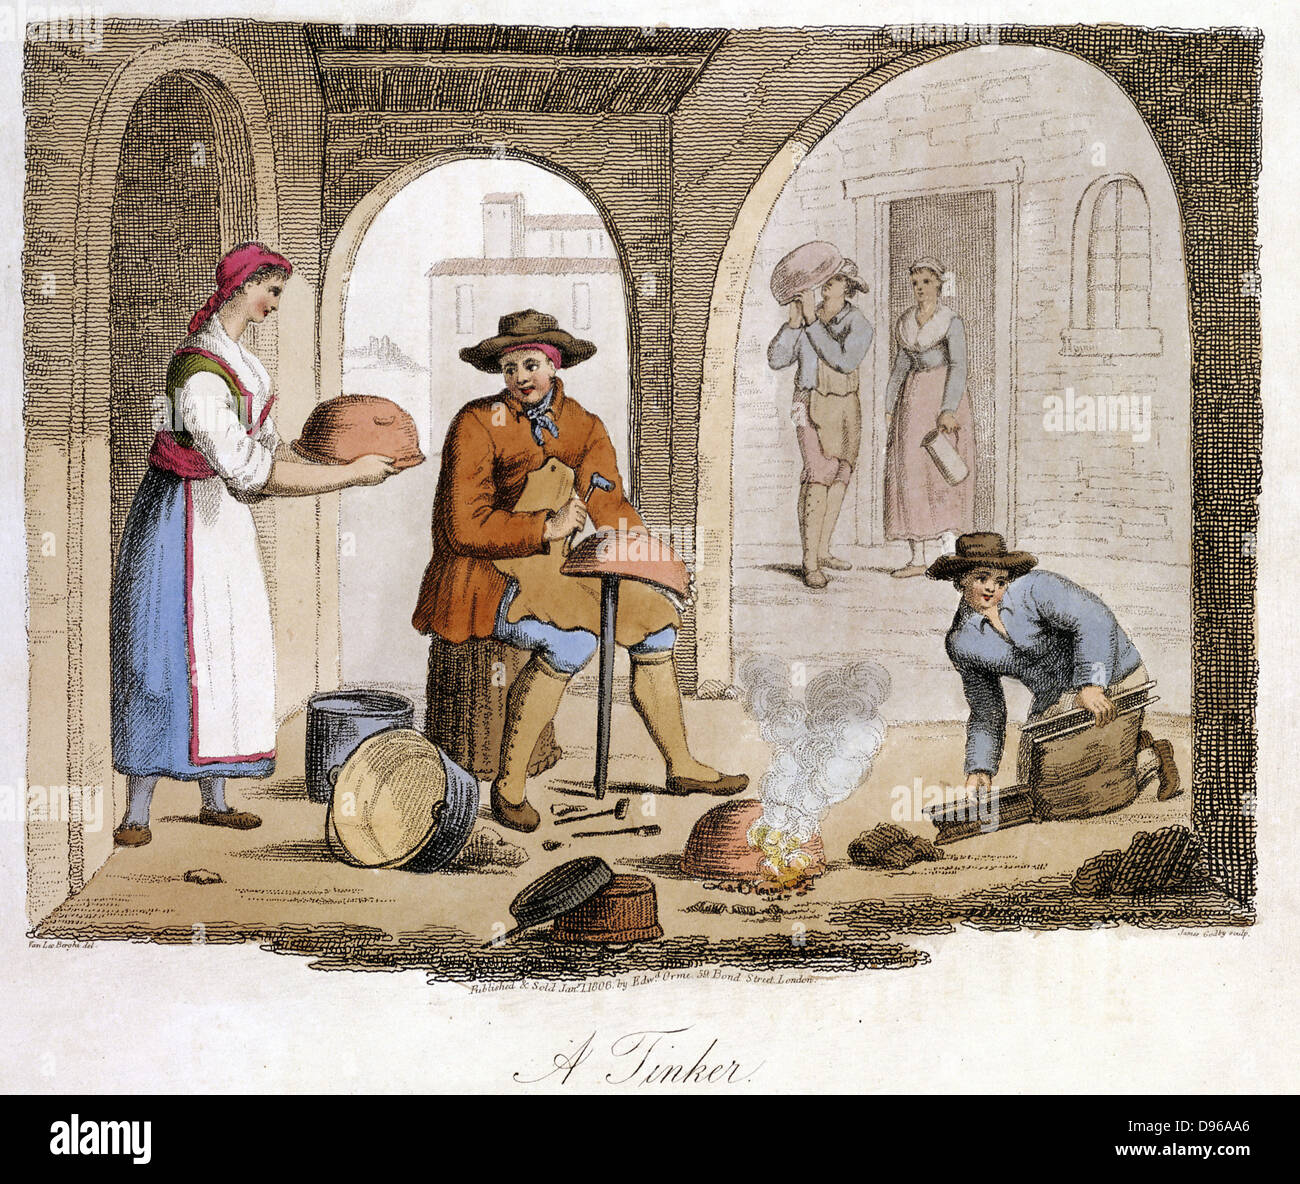 Itinerant Tinker and his boy assistant: Woman brings utensil for repair. Leather tool bag doubles as bellows creating draught for little forge. Piemonte (Piedmont) district, Northwest Italy. From Airetti 'Italian Costume, Scenery and Customs' London 1825 Stock Photo